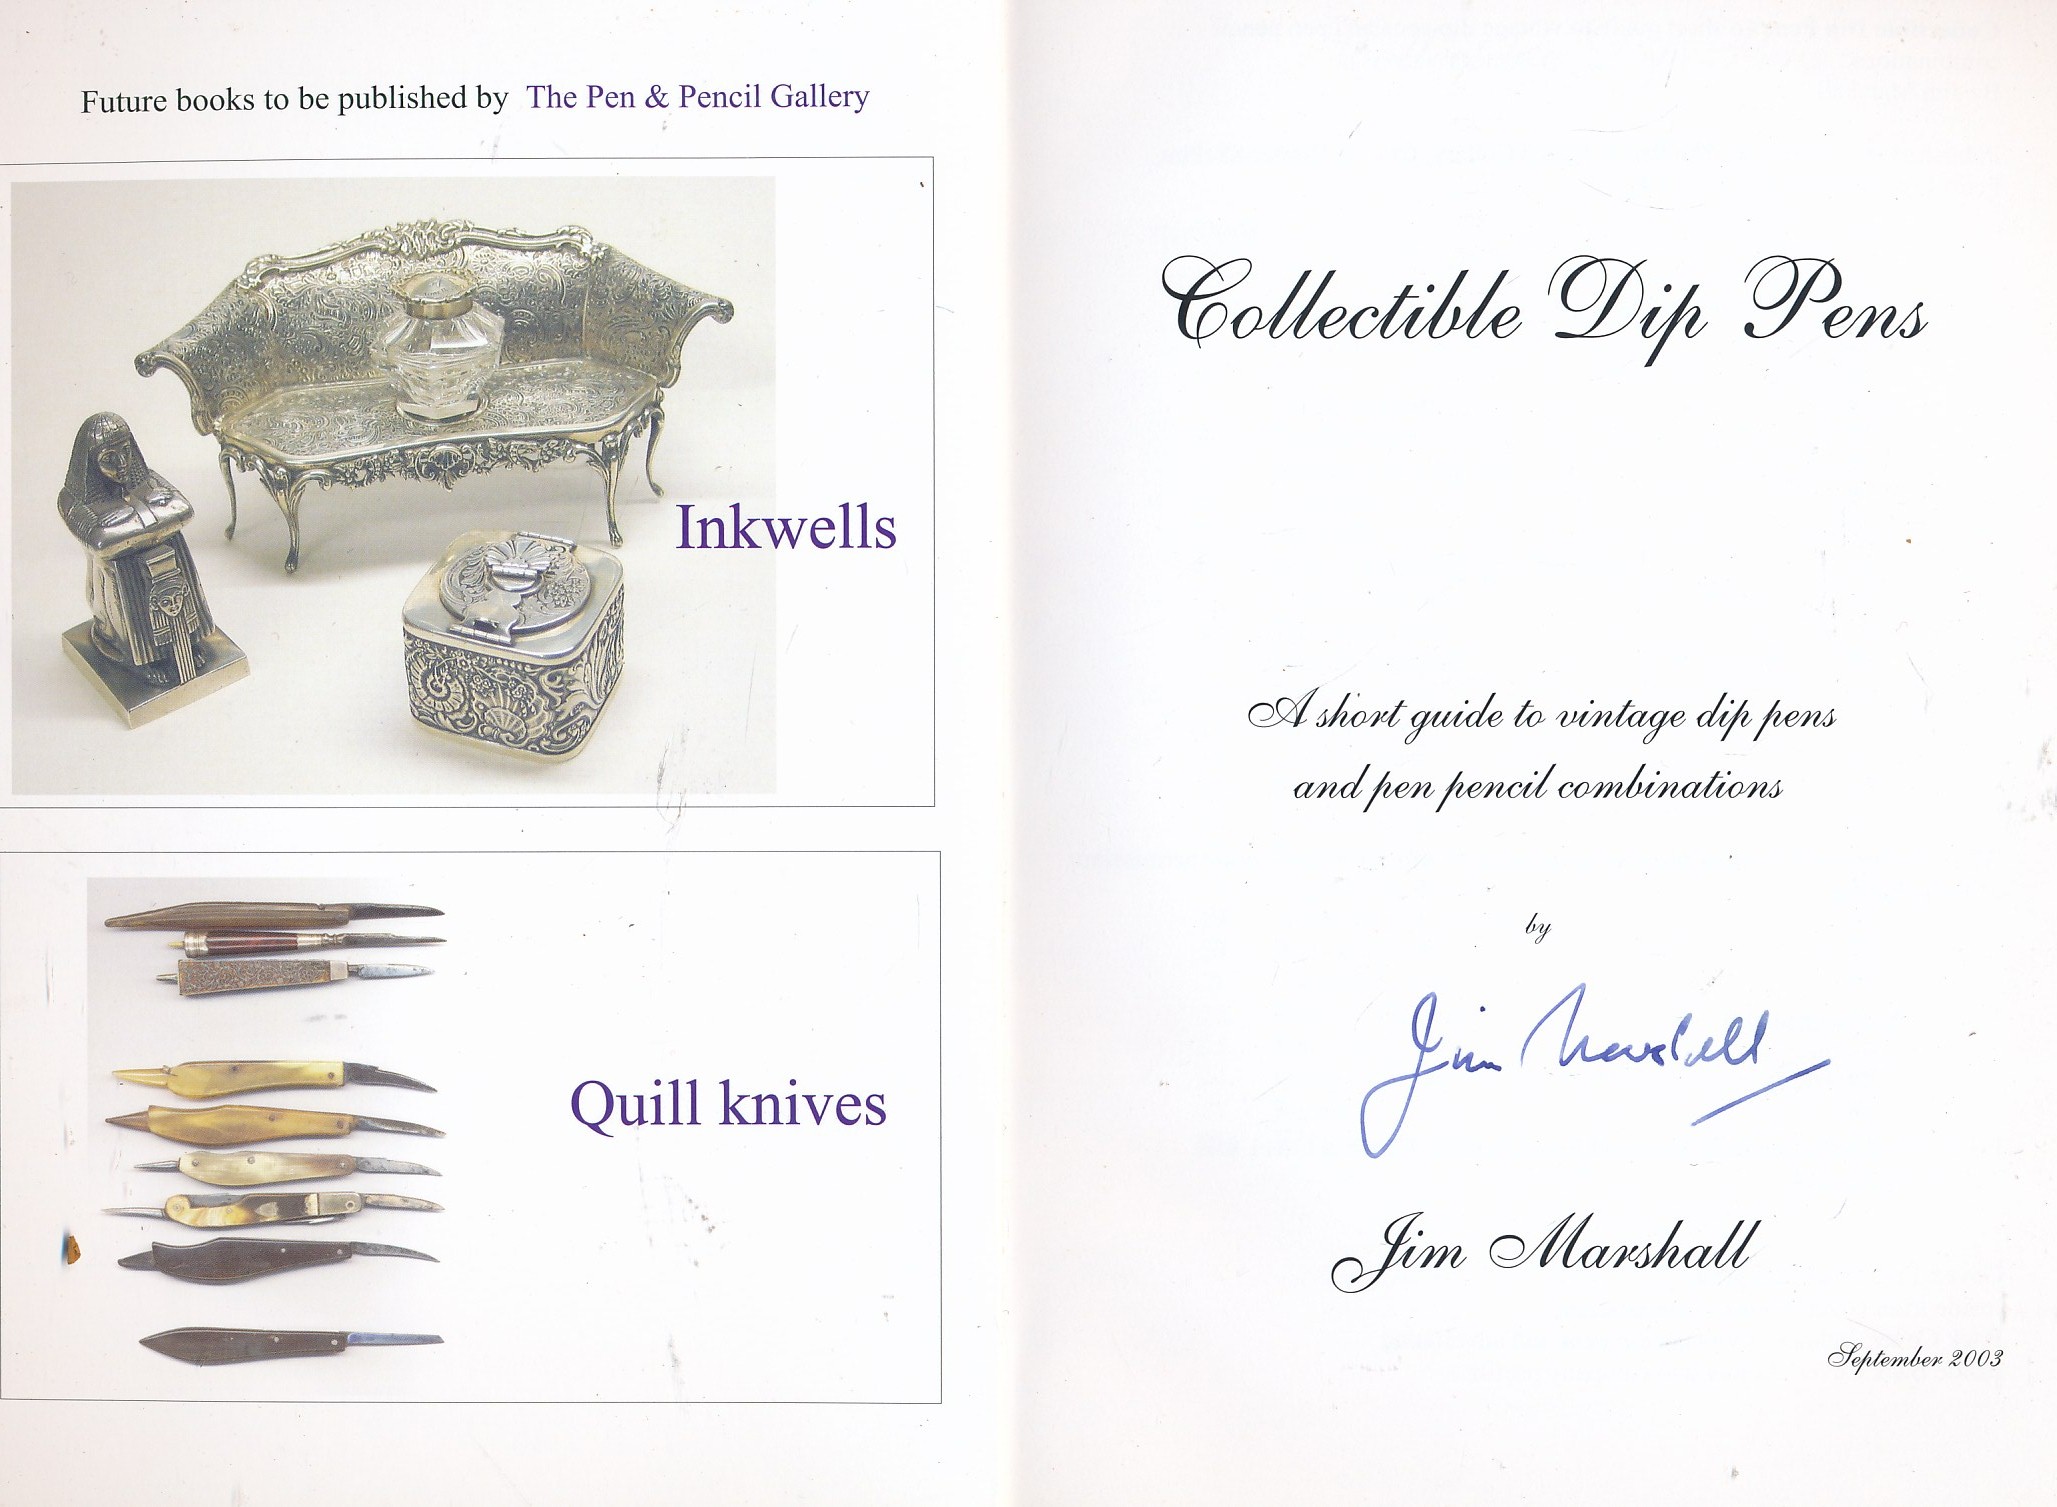 Collectible Dip Pens. A Short Guide to Vintage Dip Pens and Pen Pencil Combinations. Signed Copy.